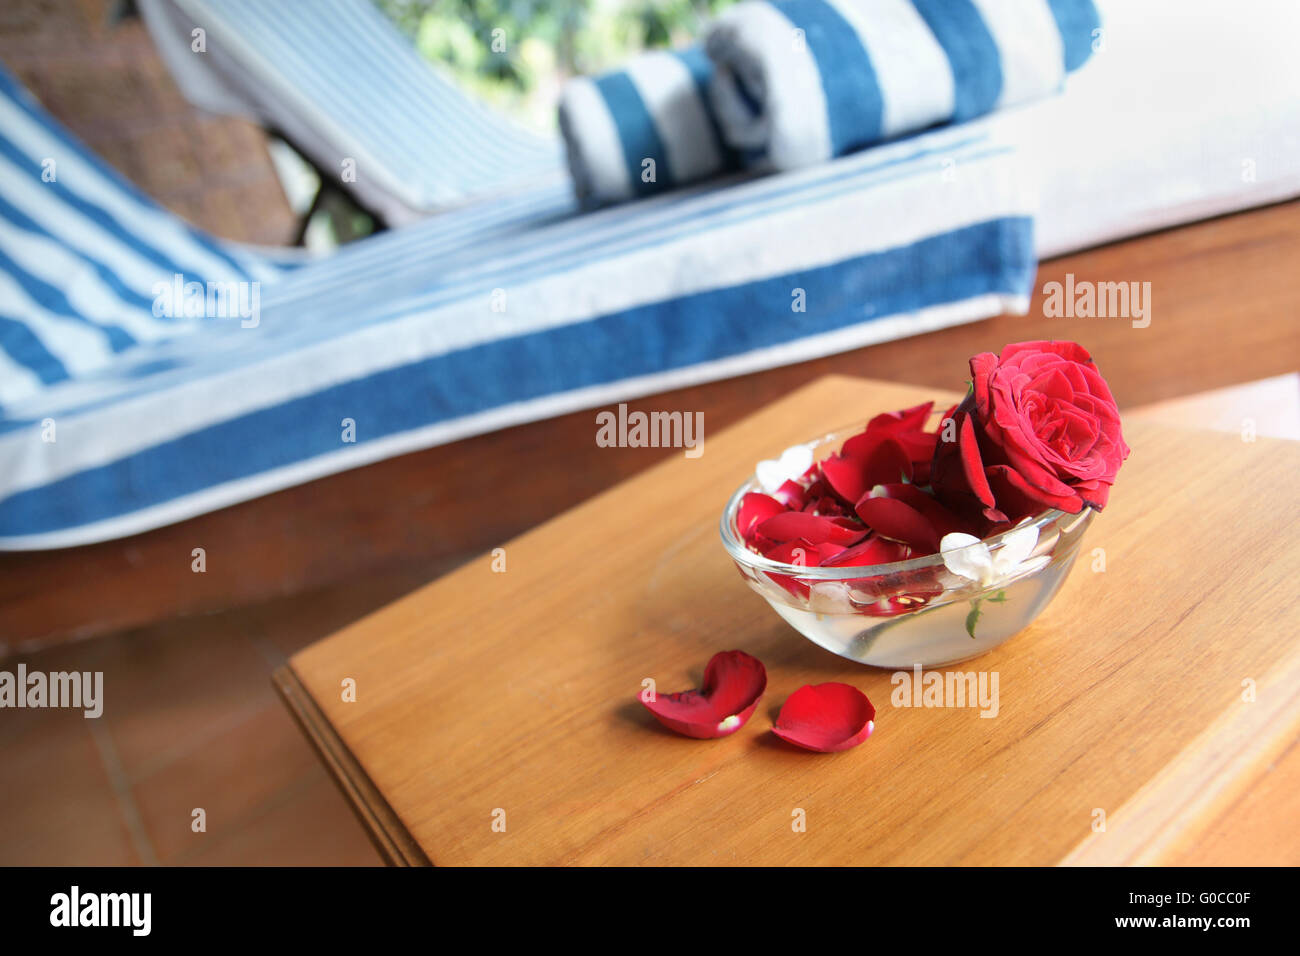 2 deck-chairs with striped towels and a rose in th Stock Photo